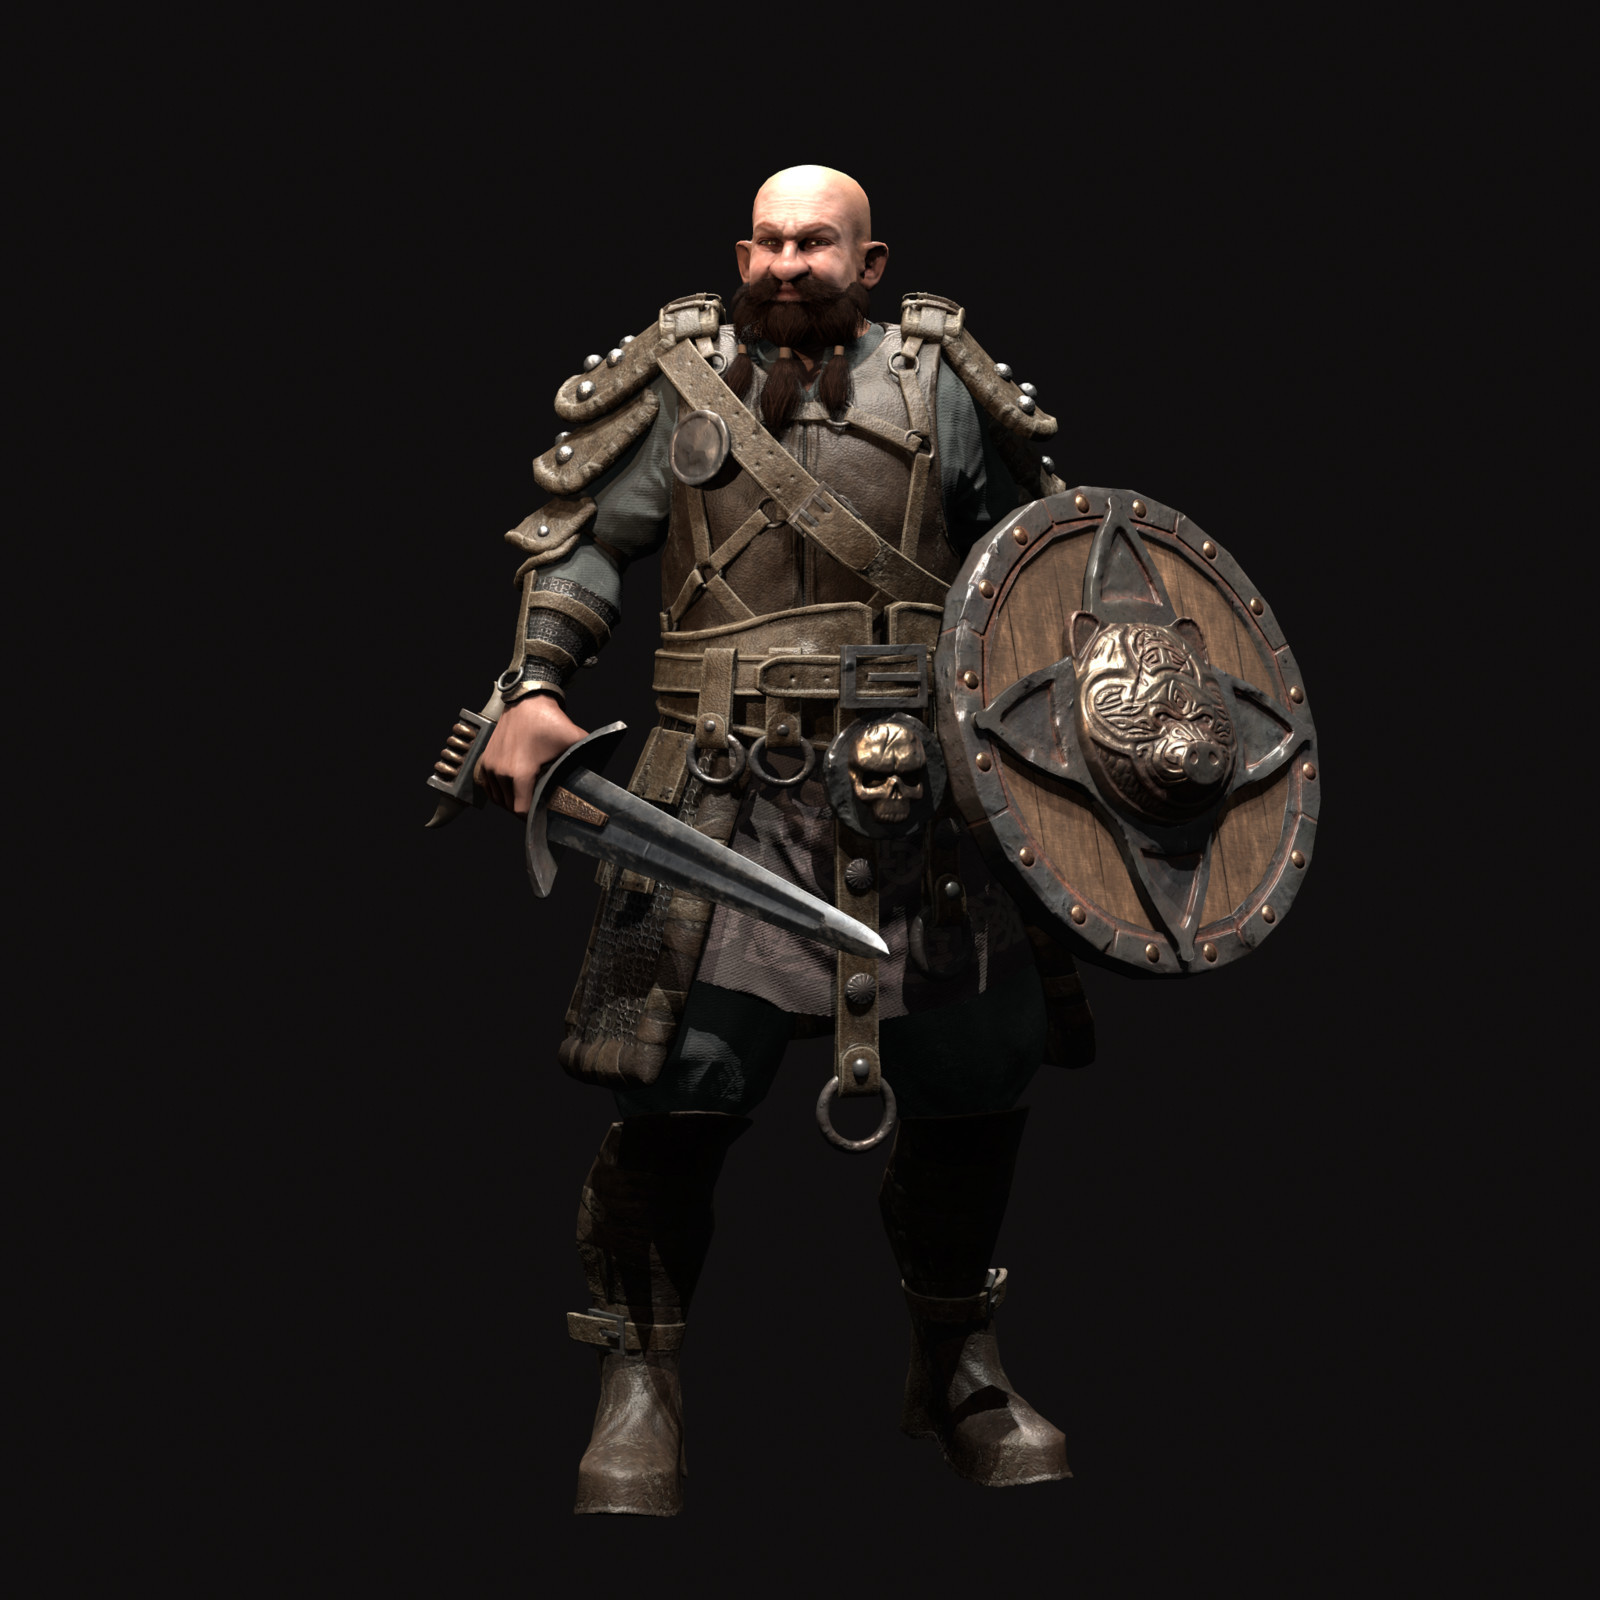 for honor fan art - If warlord was a dwarf.